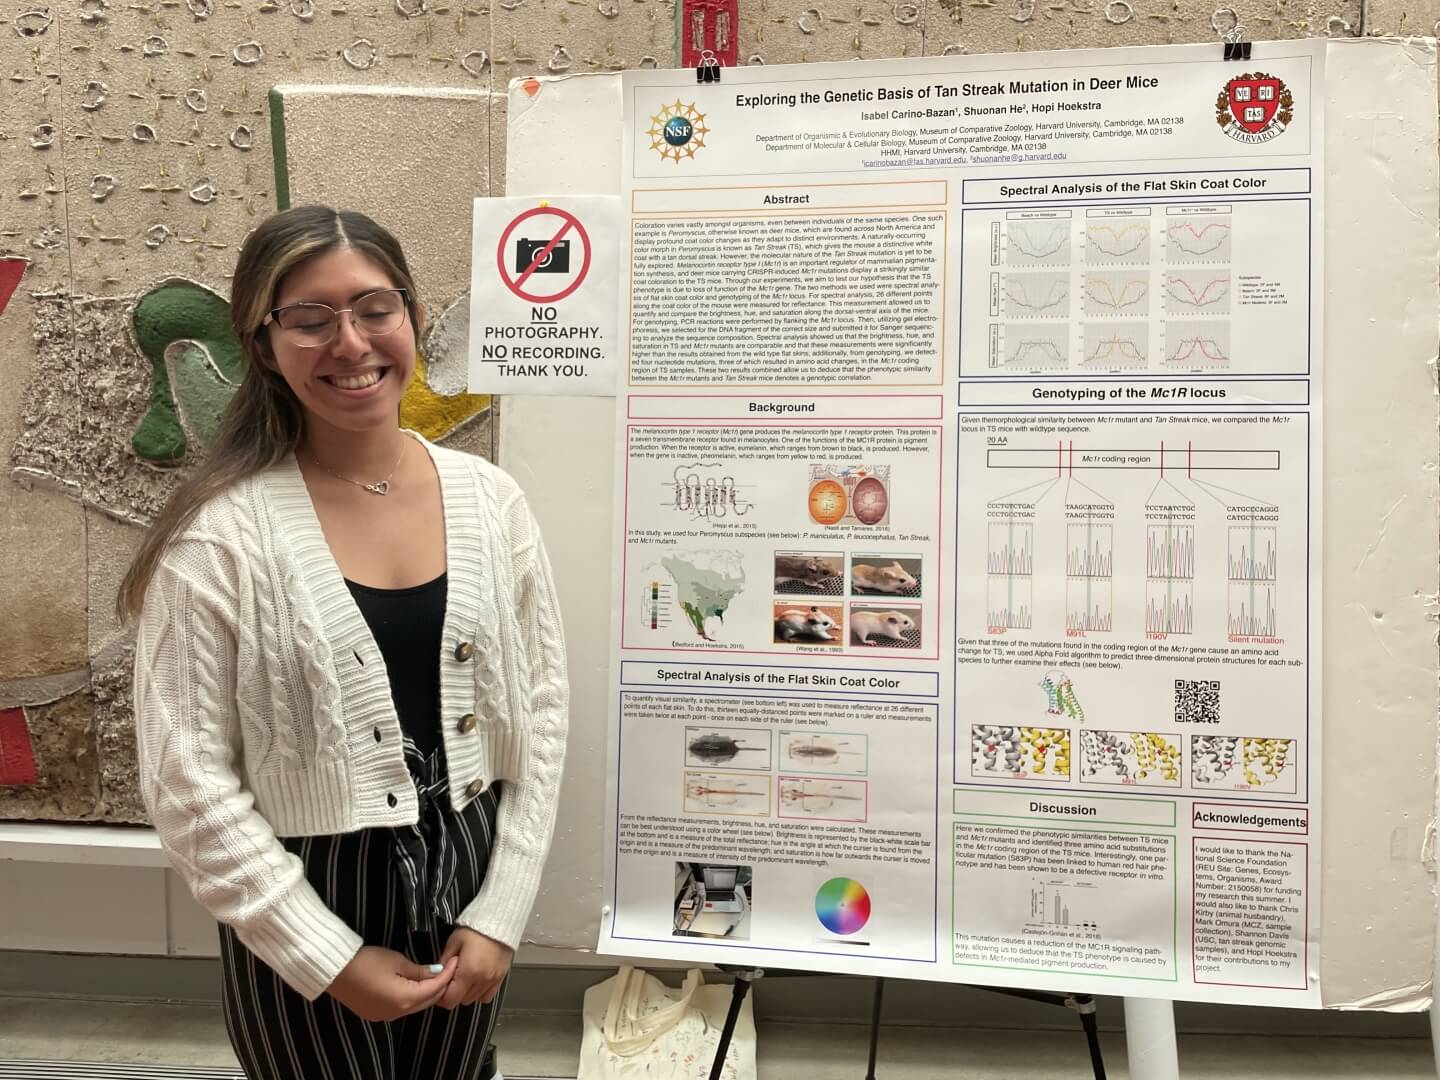 Isabel Carino-Bazan, a rising sophomore molecular biology and economics student at Lehigh University, with his REU research poster